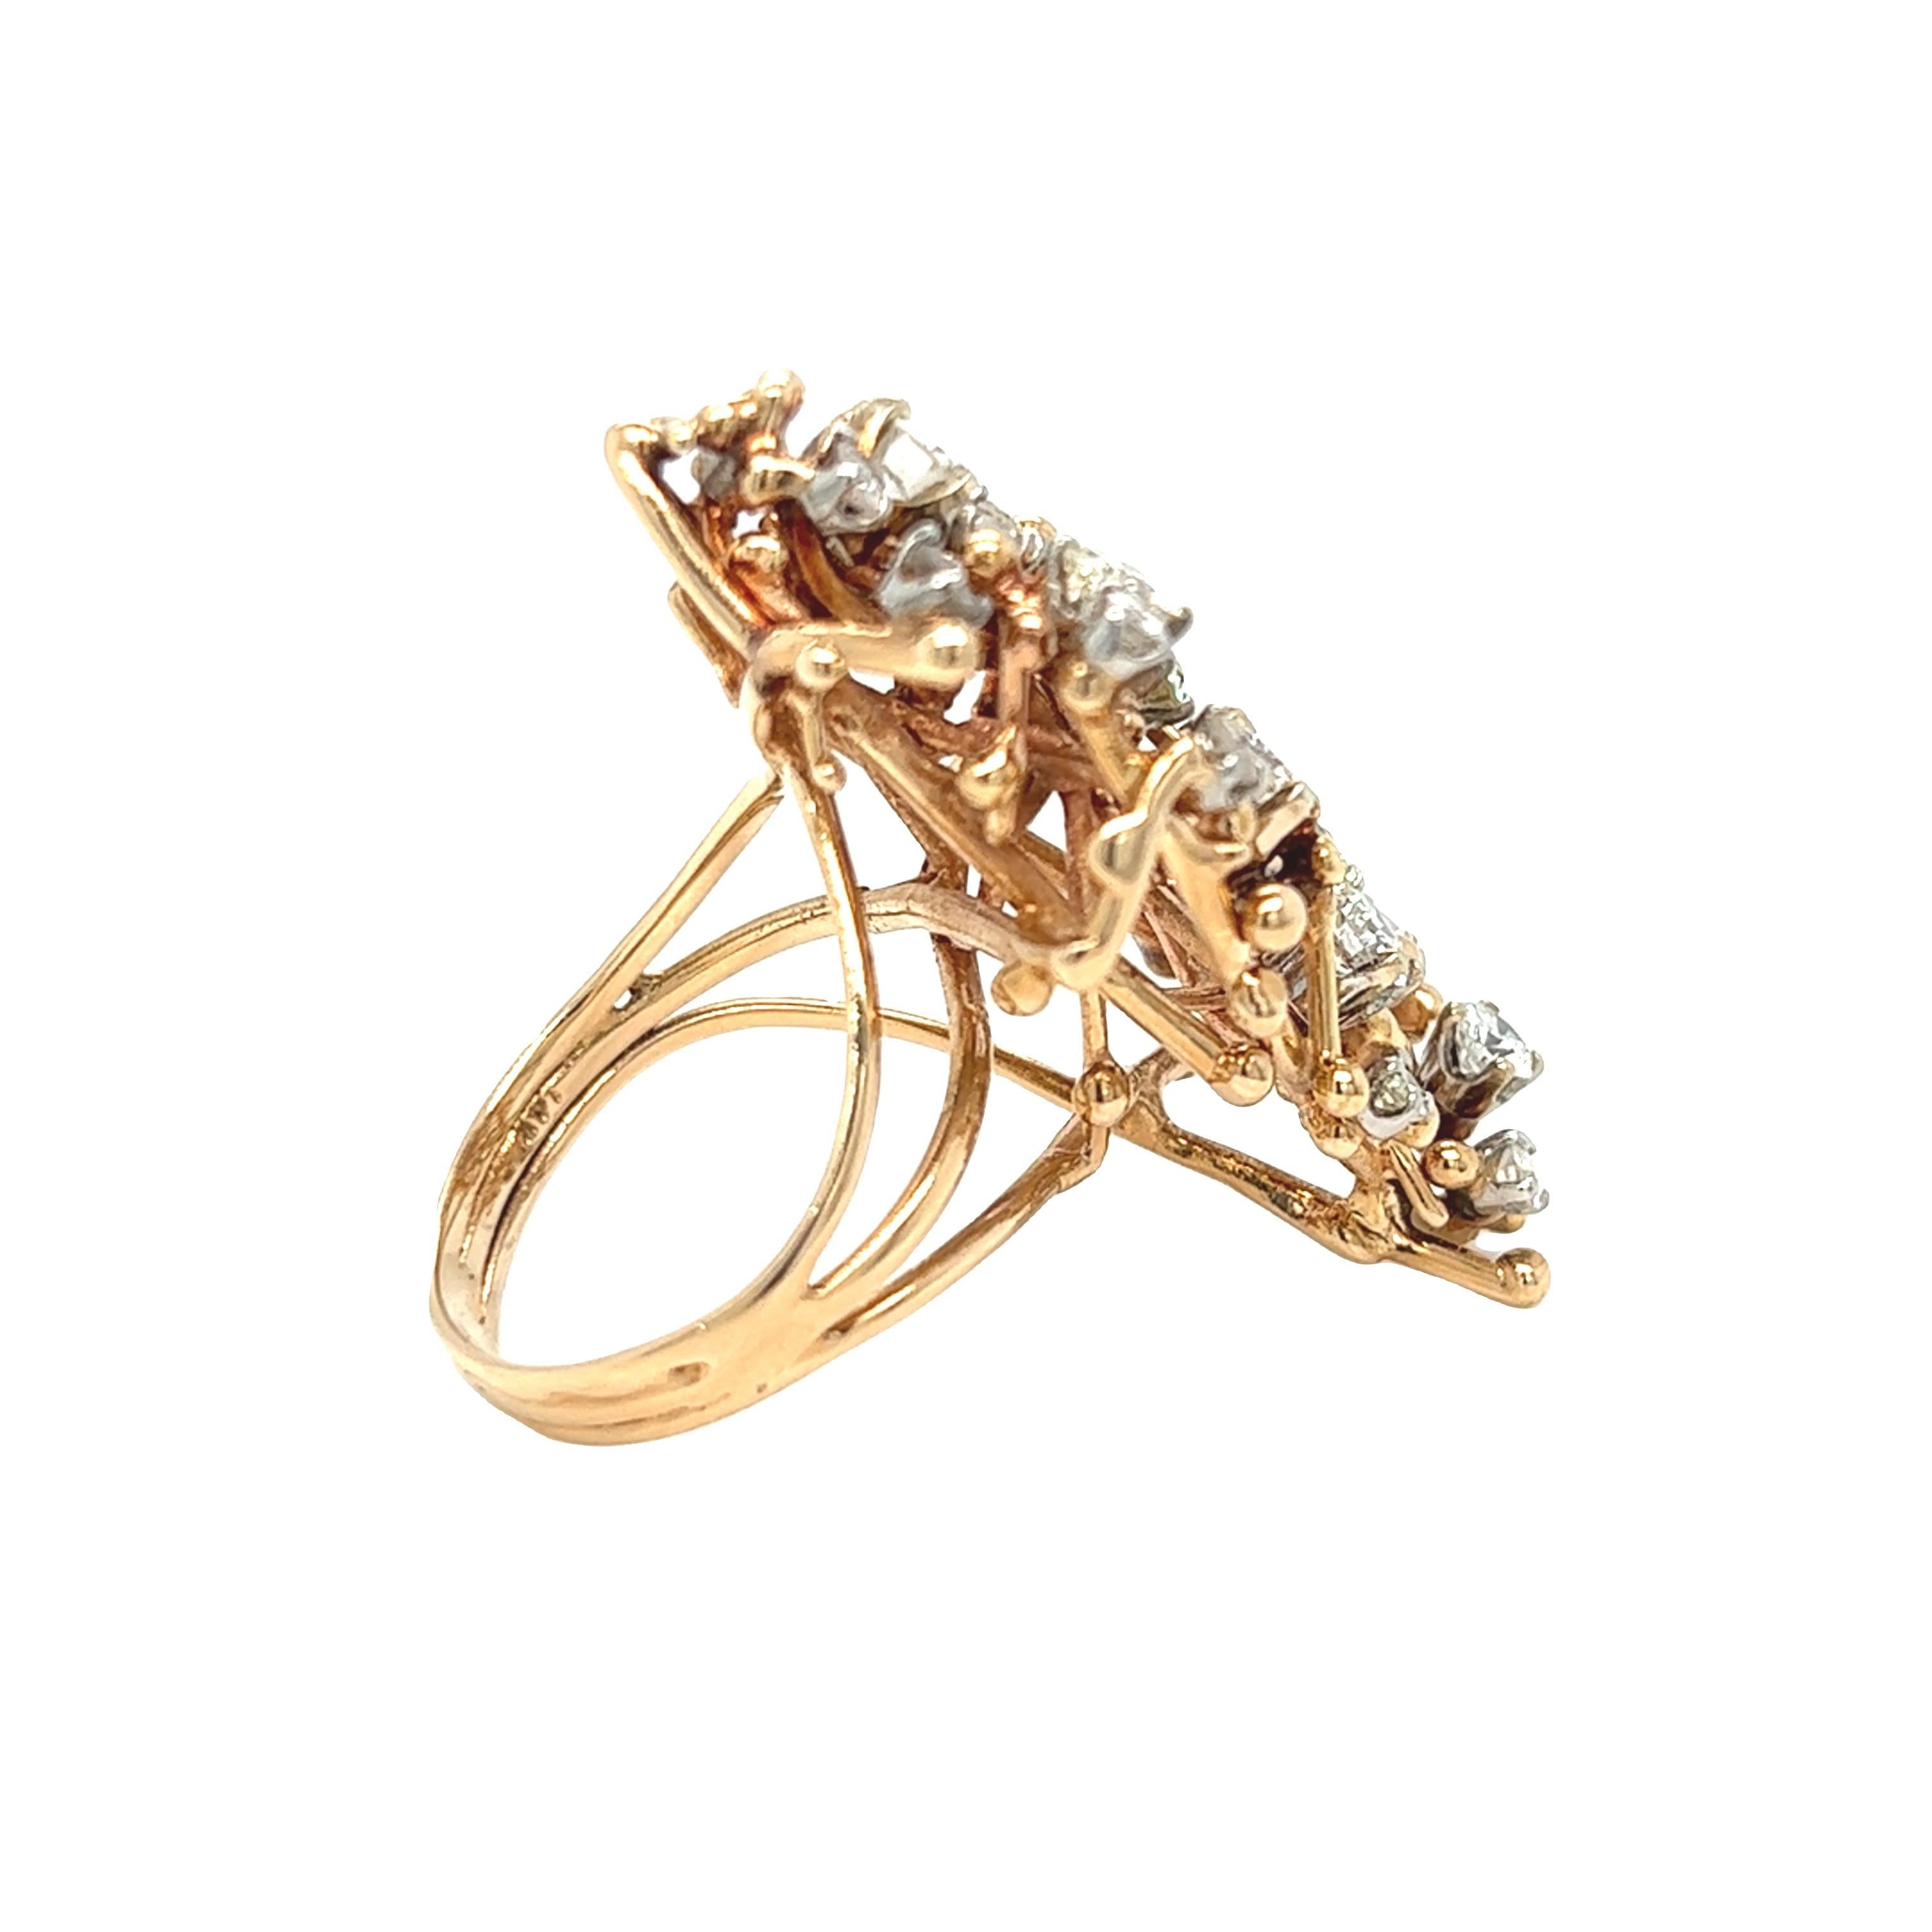 Brutalist Era 2.25 Carat Cluster Diamond Ring 14K Yellow Gold In Good Condition For Sale In beverly hills, CA